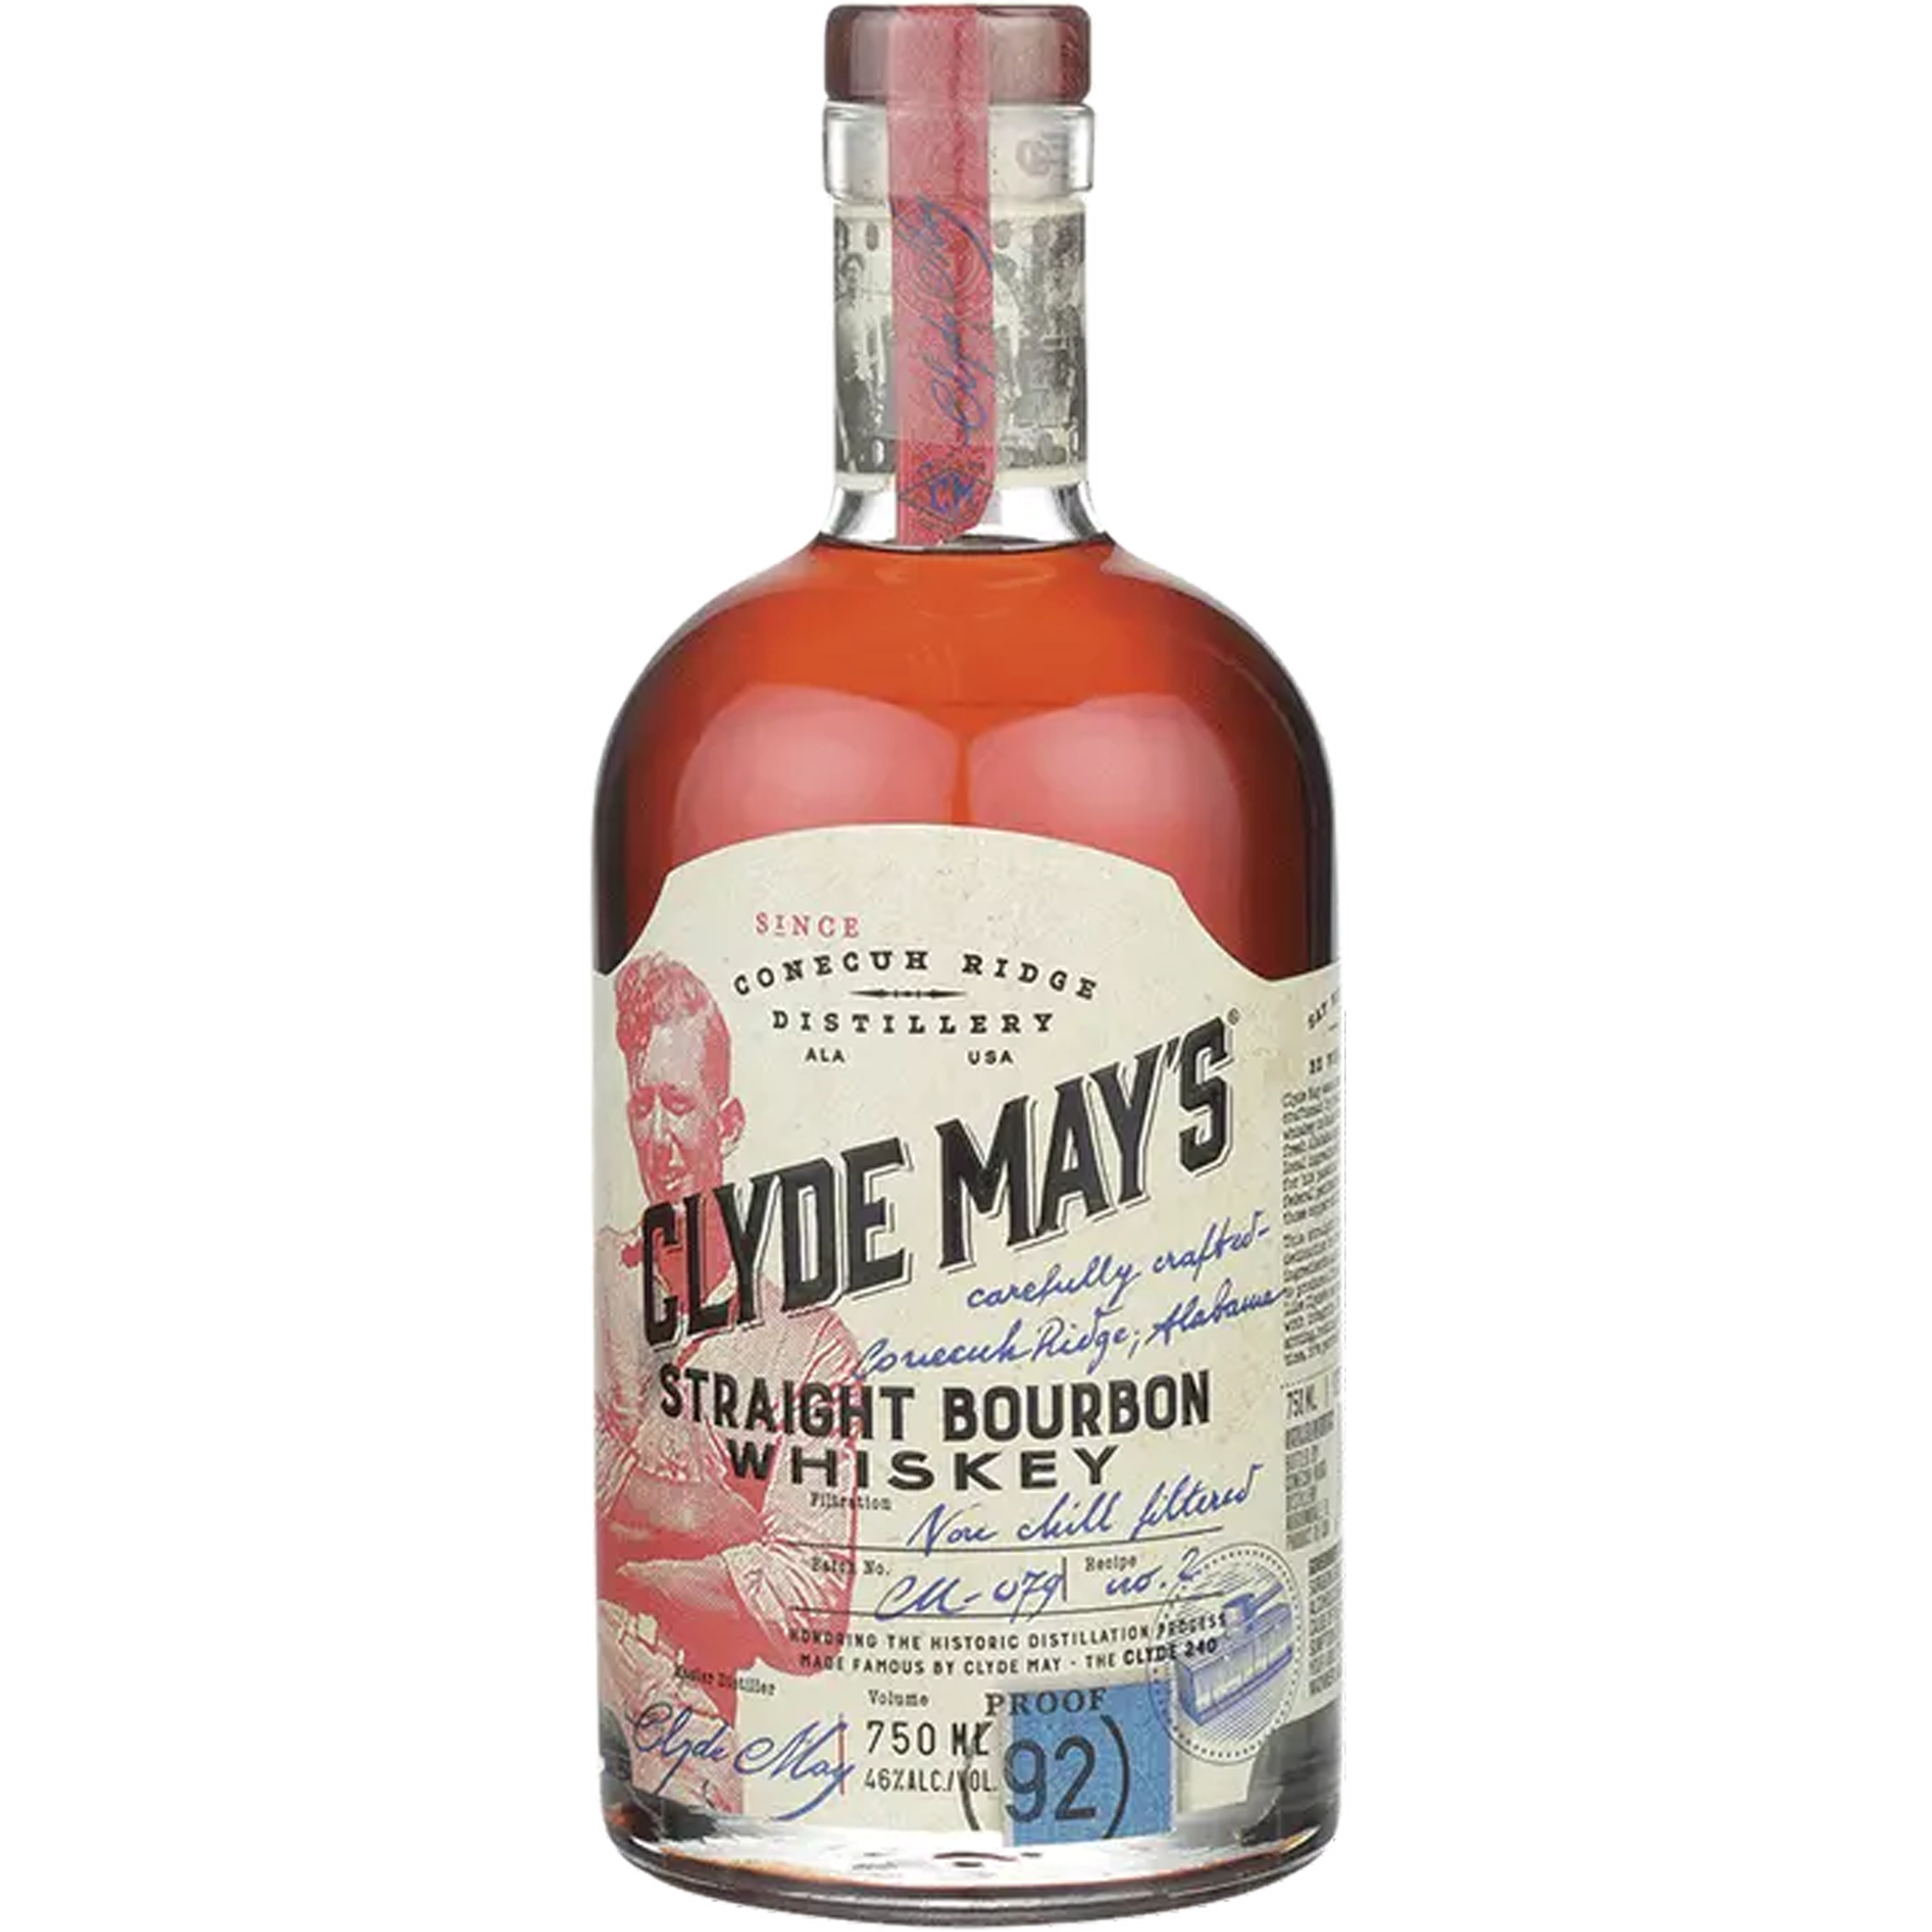 Clyde May's Straight Bourbon Whiskey 92 Proof